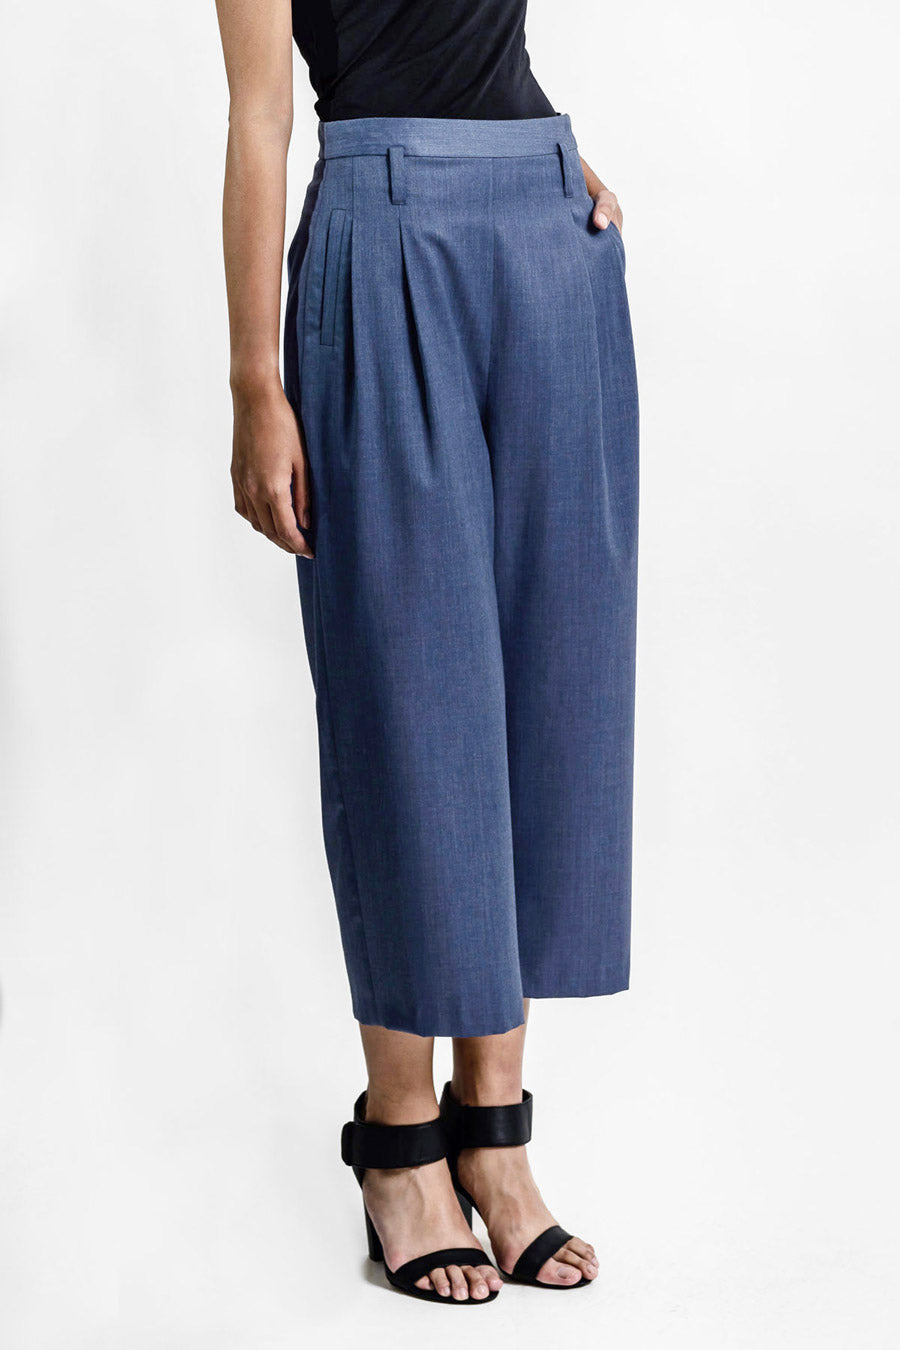 Tailored Culottes - Blue (US 4, 6, 8)